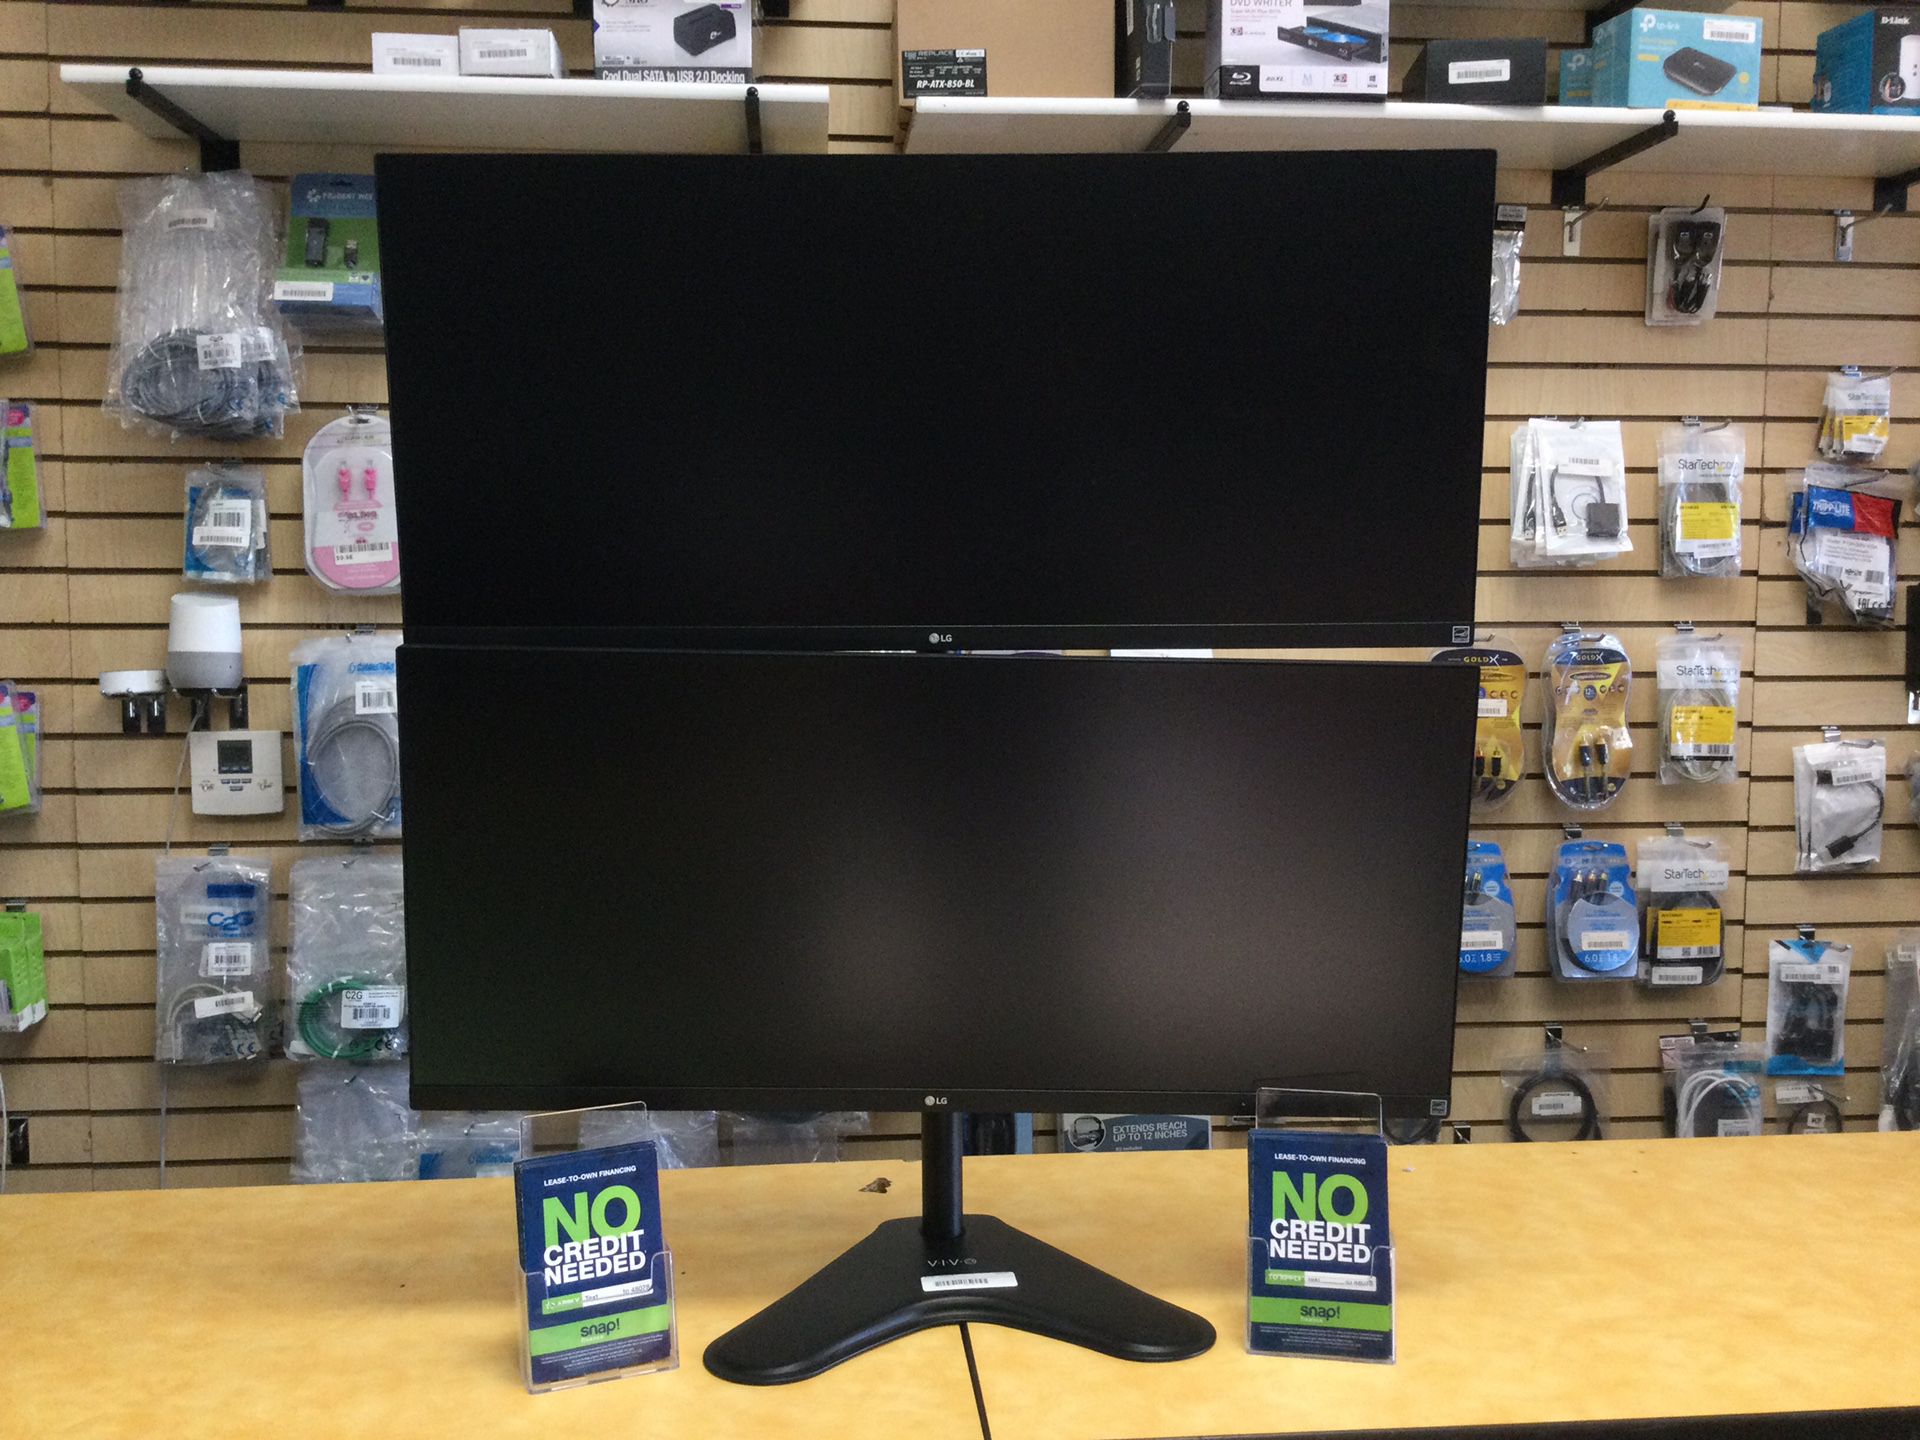 Monitor Mount With 2x 34” LG Ultrawide Monitors - $0 DOWN!